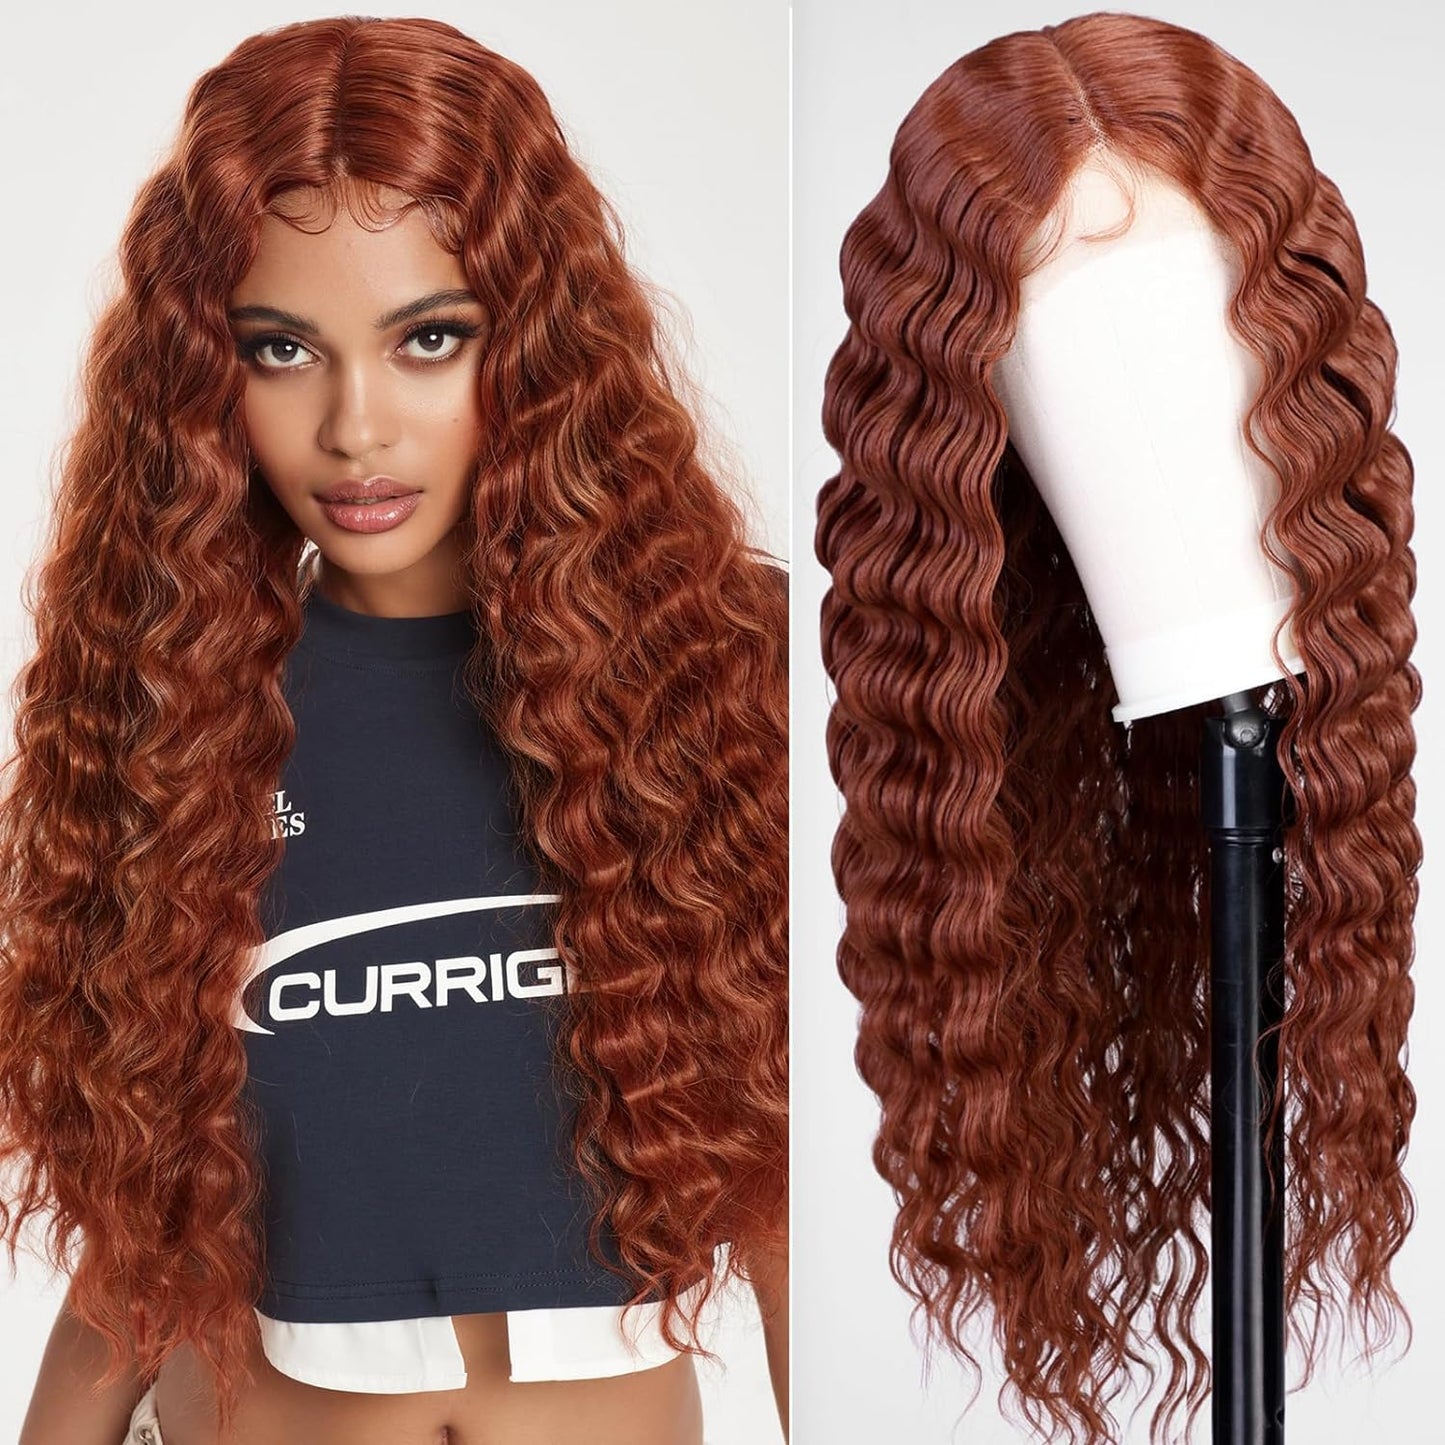 Long Deep Wave Wig,Ginger Reddish Brown Long Curly Synthetic Hair Wigs,Loose Deep Wave Wig,Lace Front Wigs for Women with Babyhair Crimps Curls Hair Replacement Wigs for Daily Party Use 28"